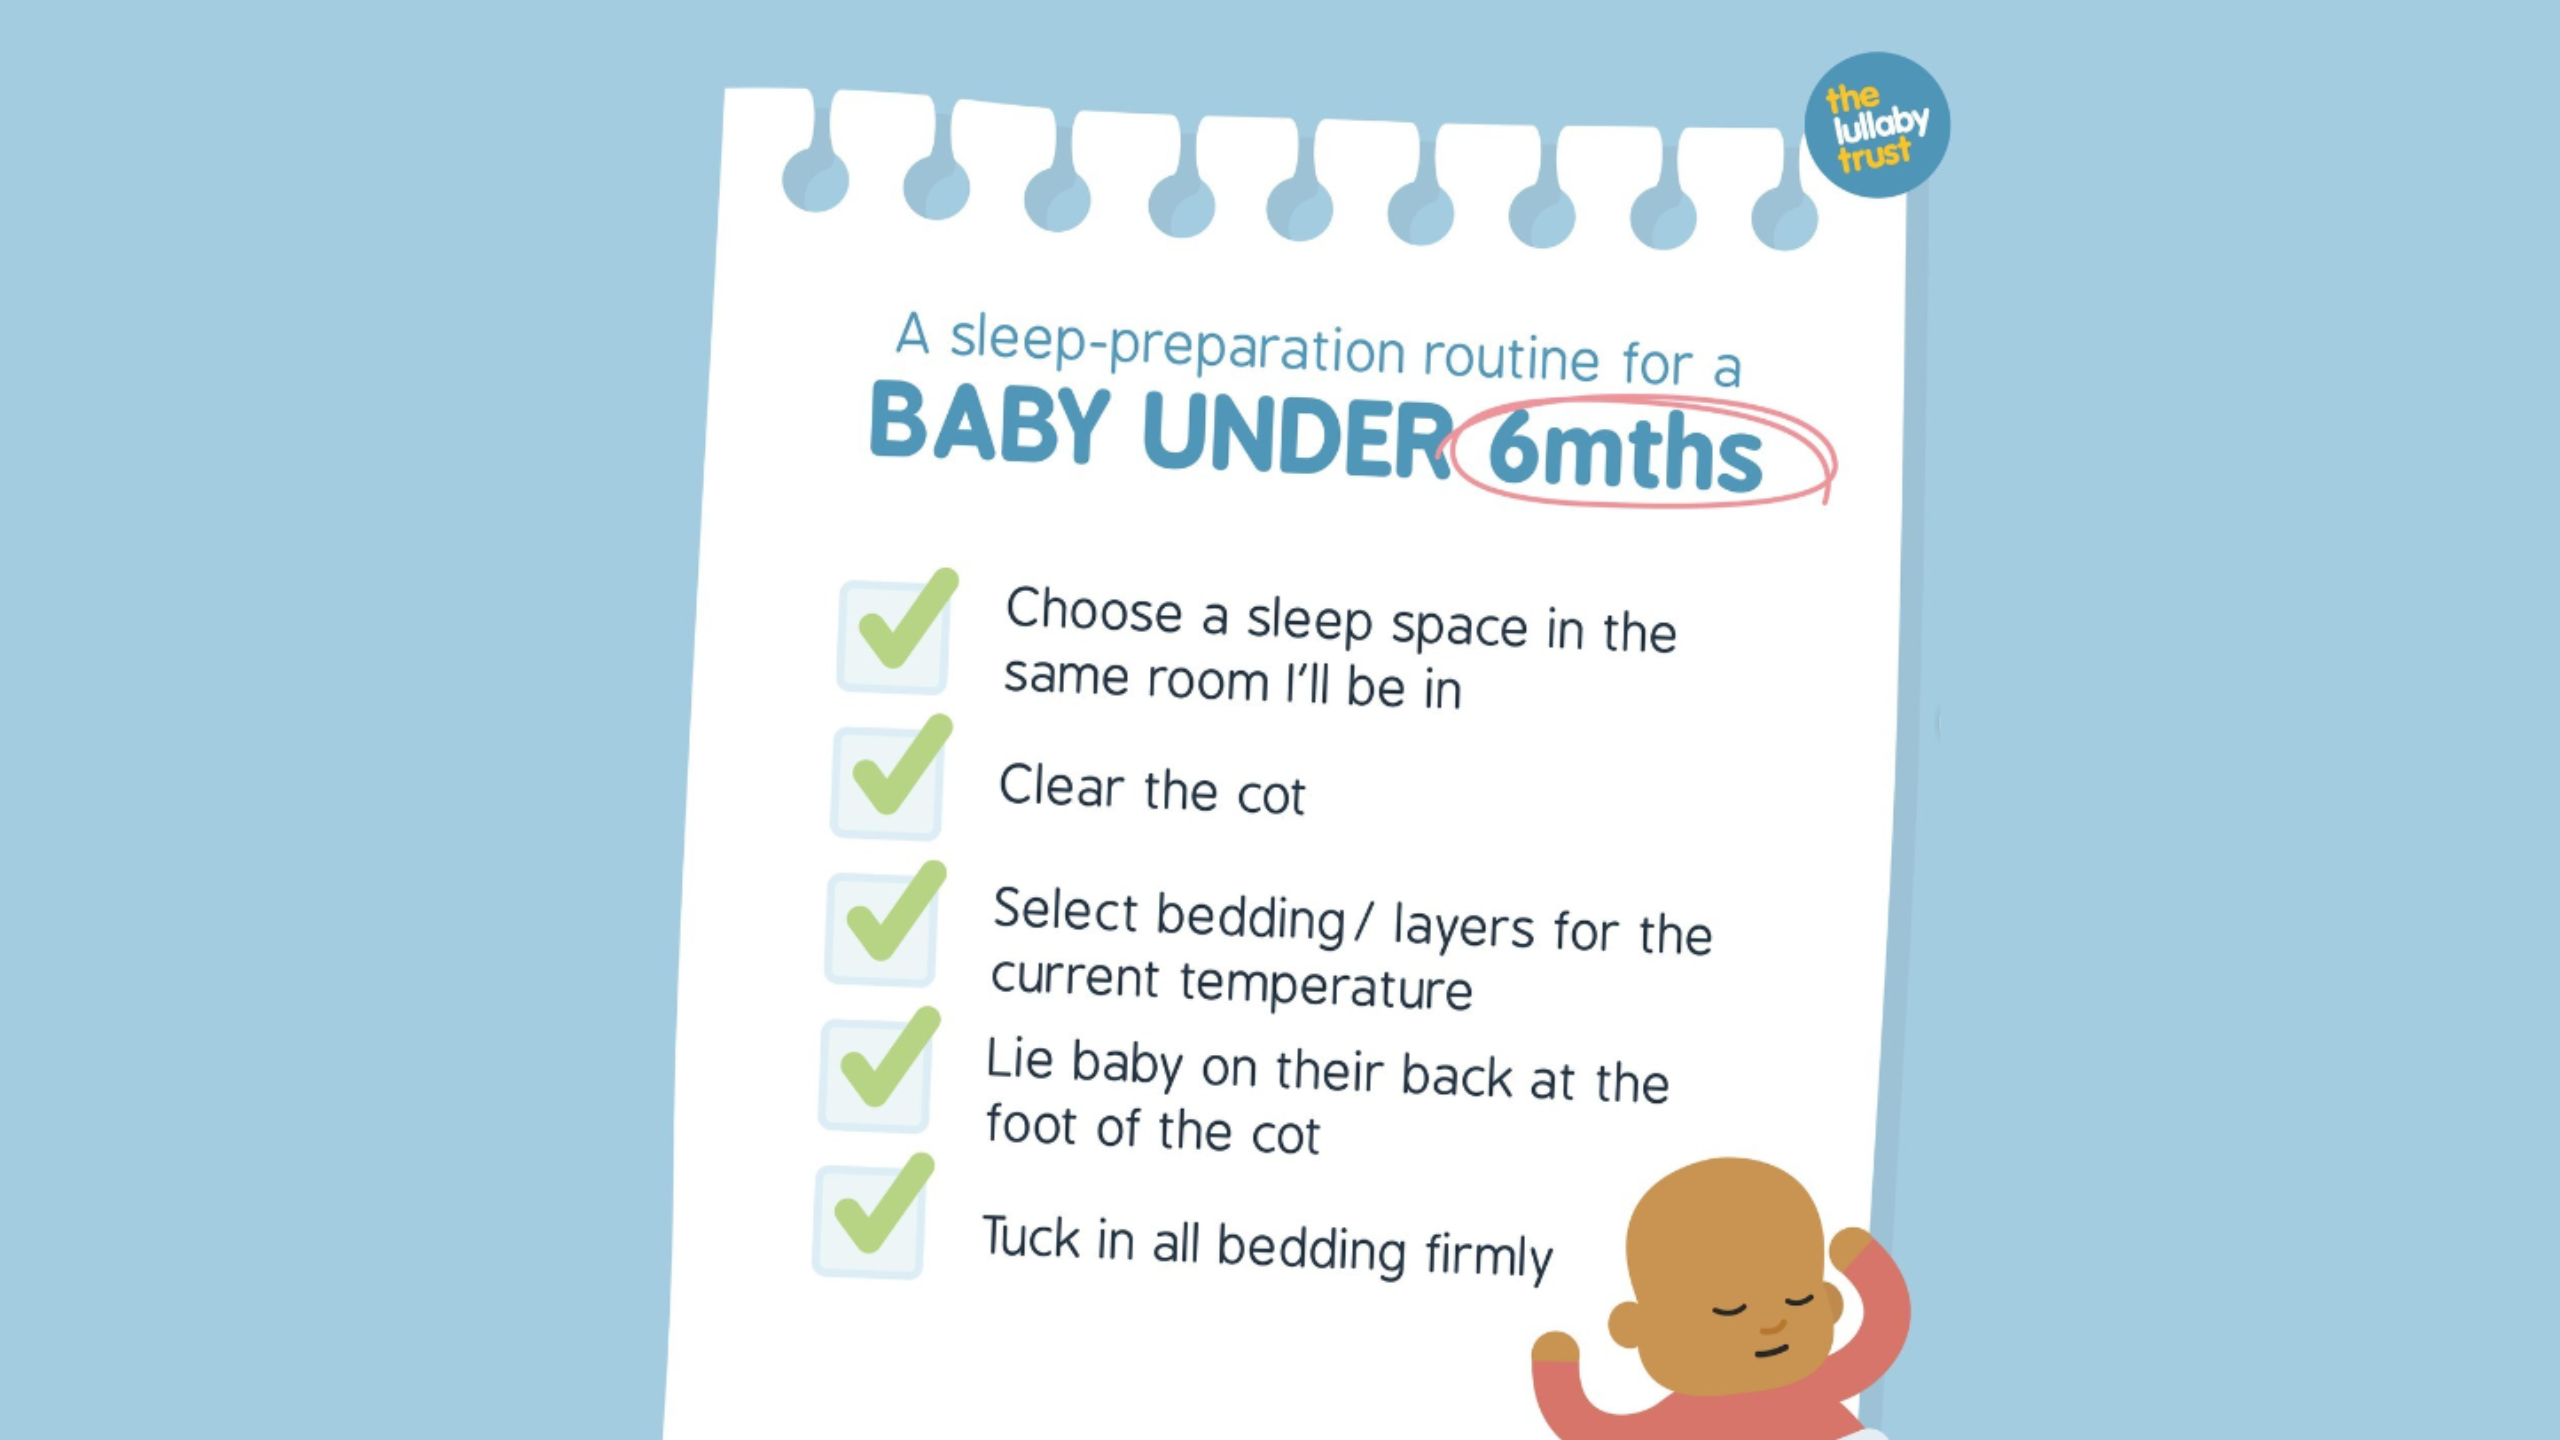 There is a checklist. Choose a sleep space in the same room I'll be in; clear the cot; select bedding / layers for the current temperature; lie baby on their back at the foot of the cot; tuck in all bedding firmly.